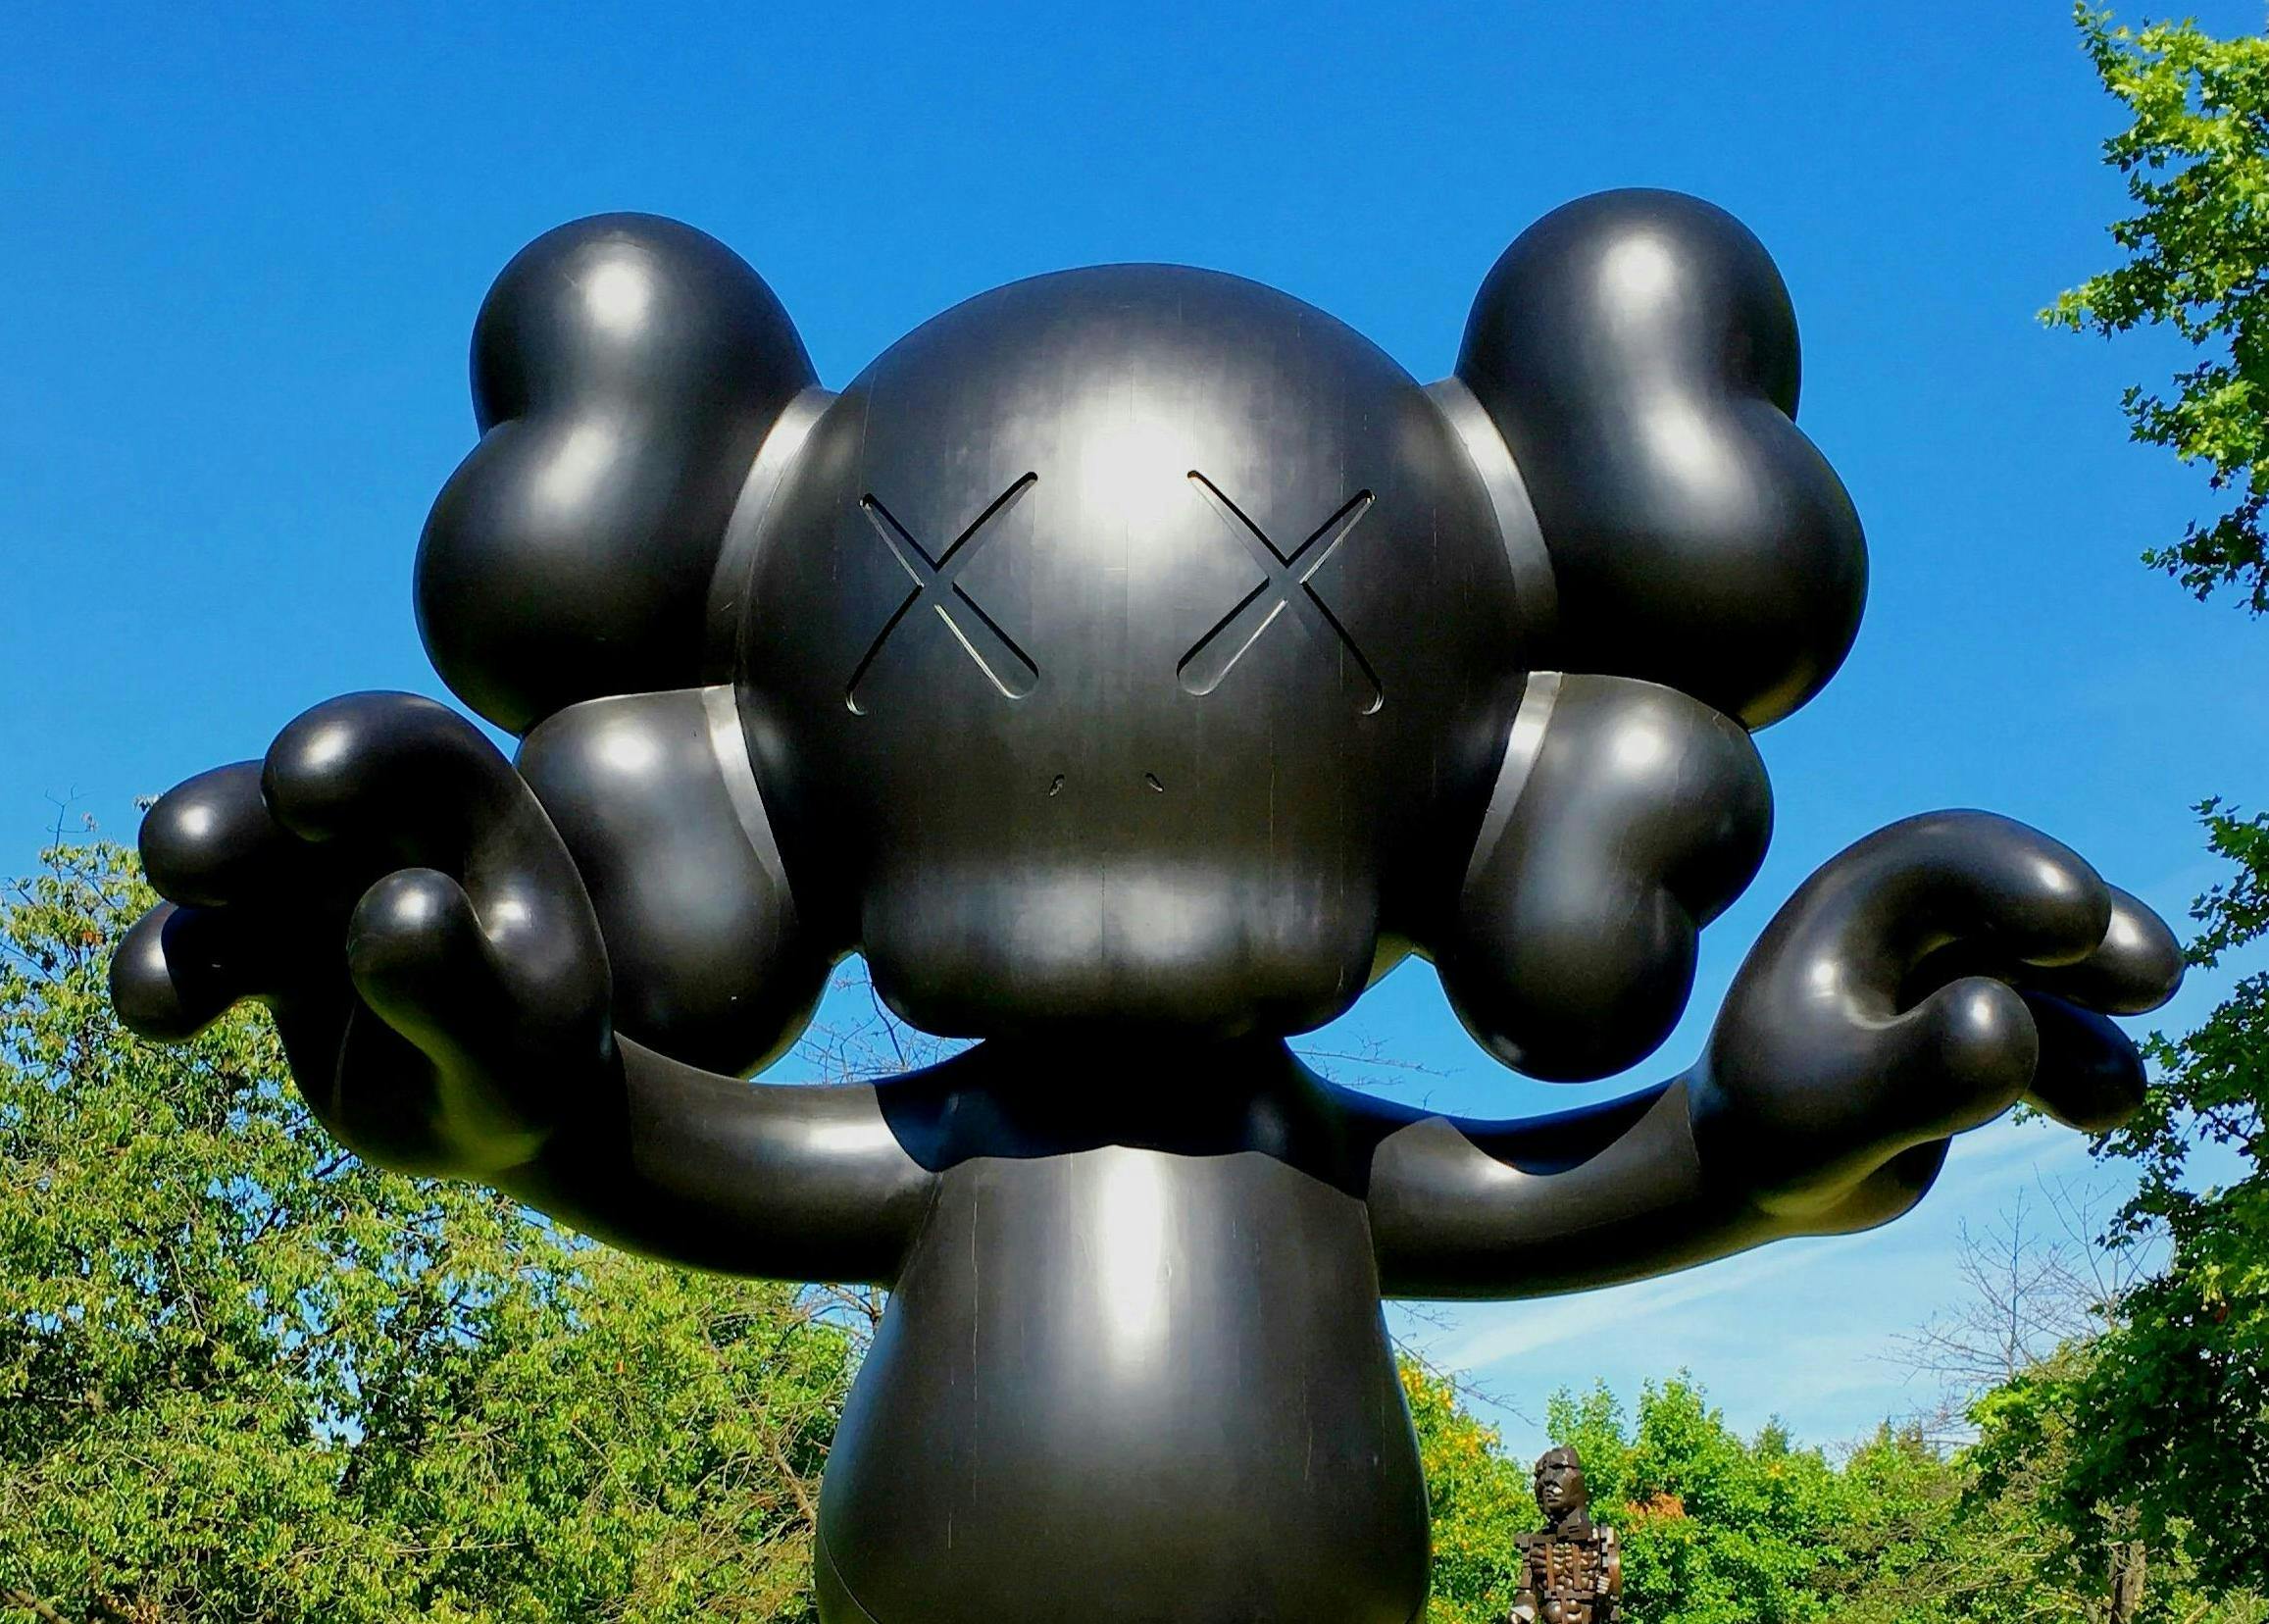 KAWS: Time off exhibition at the Parrish art museum